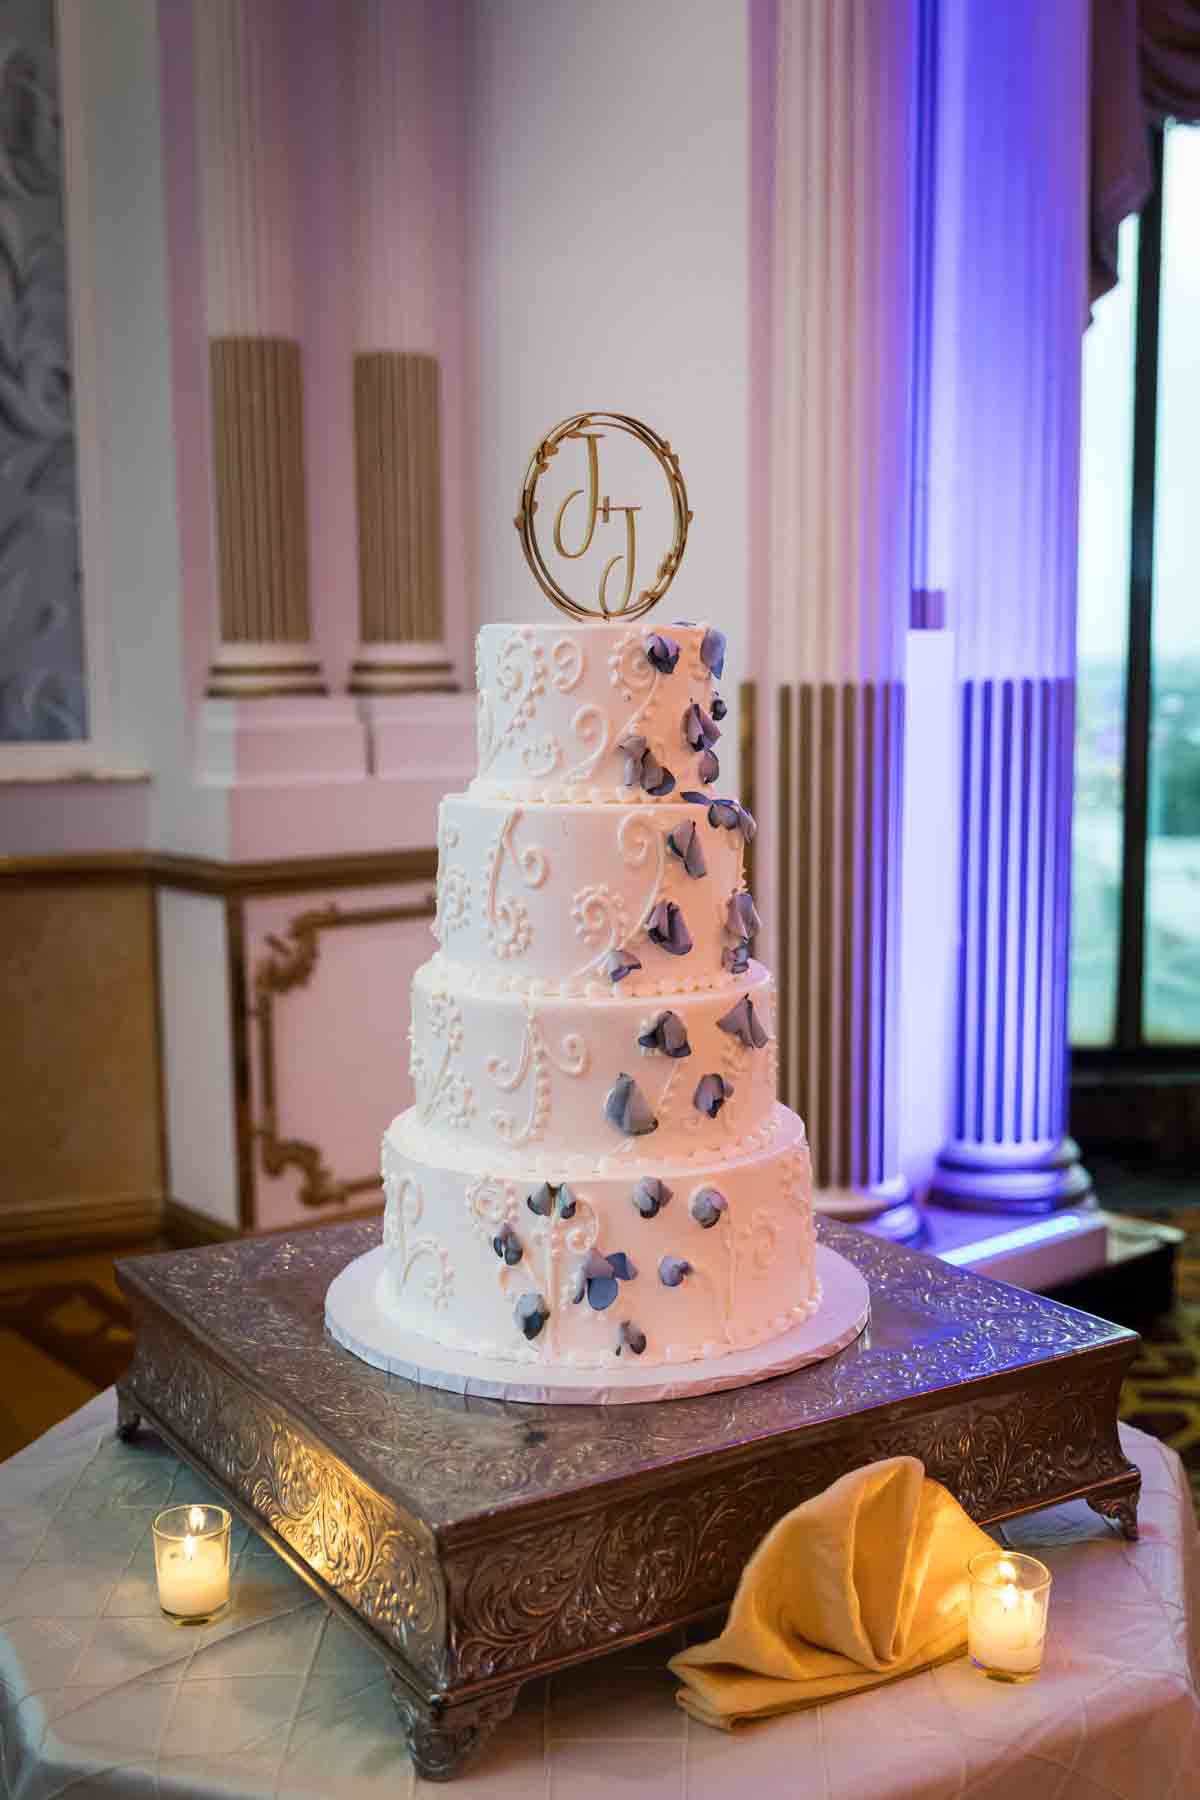 Four layer wedding cake with J+J wedding topper at a Terrace on the Park wedding